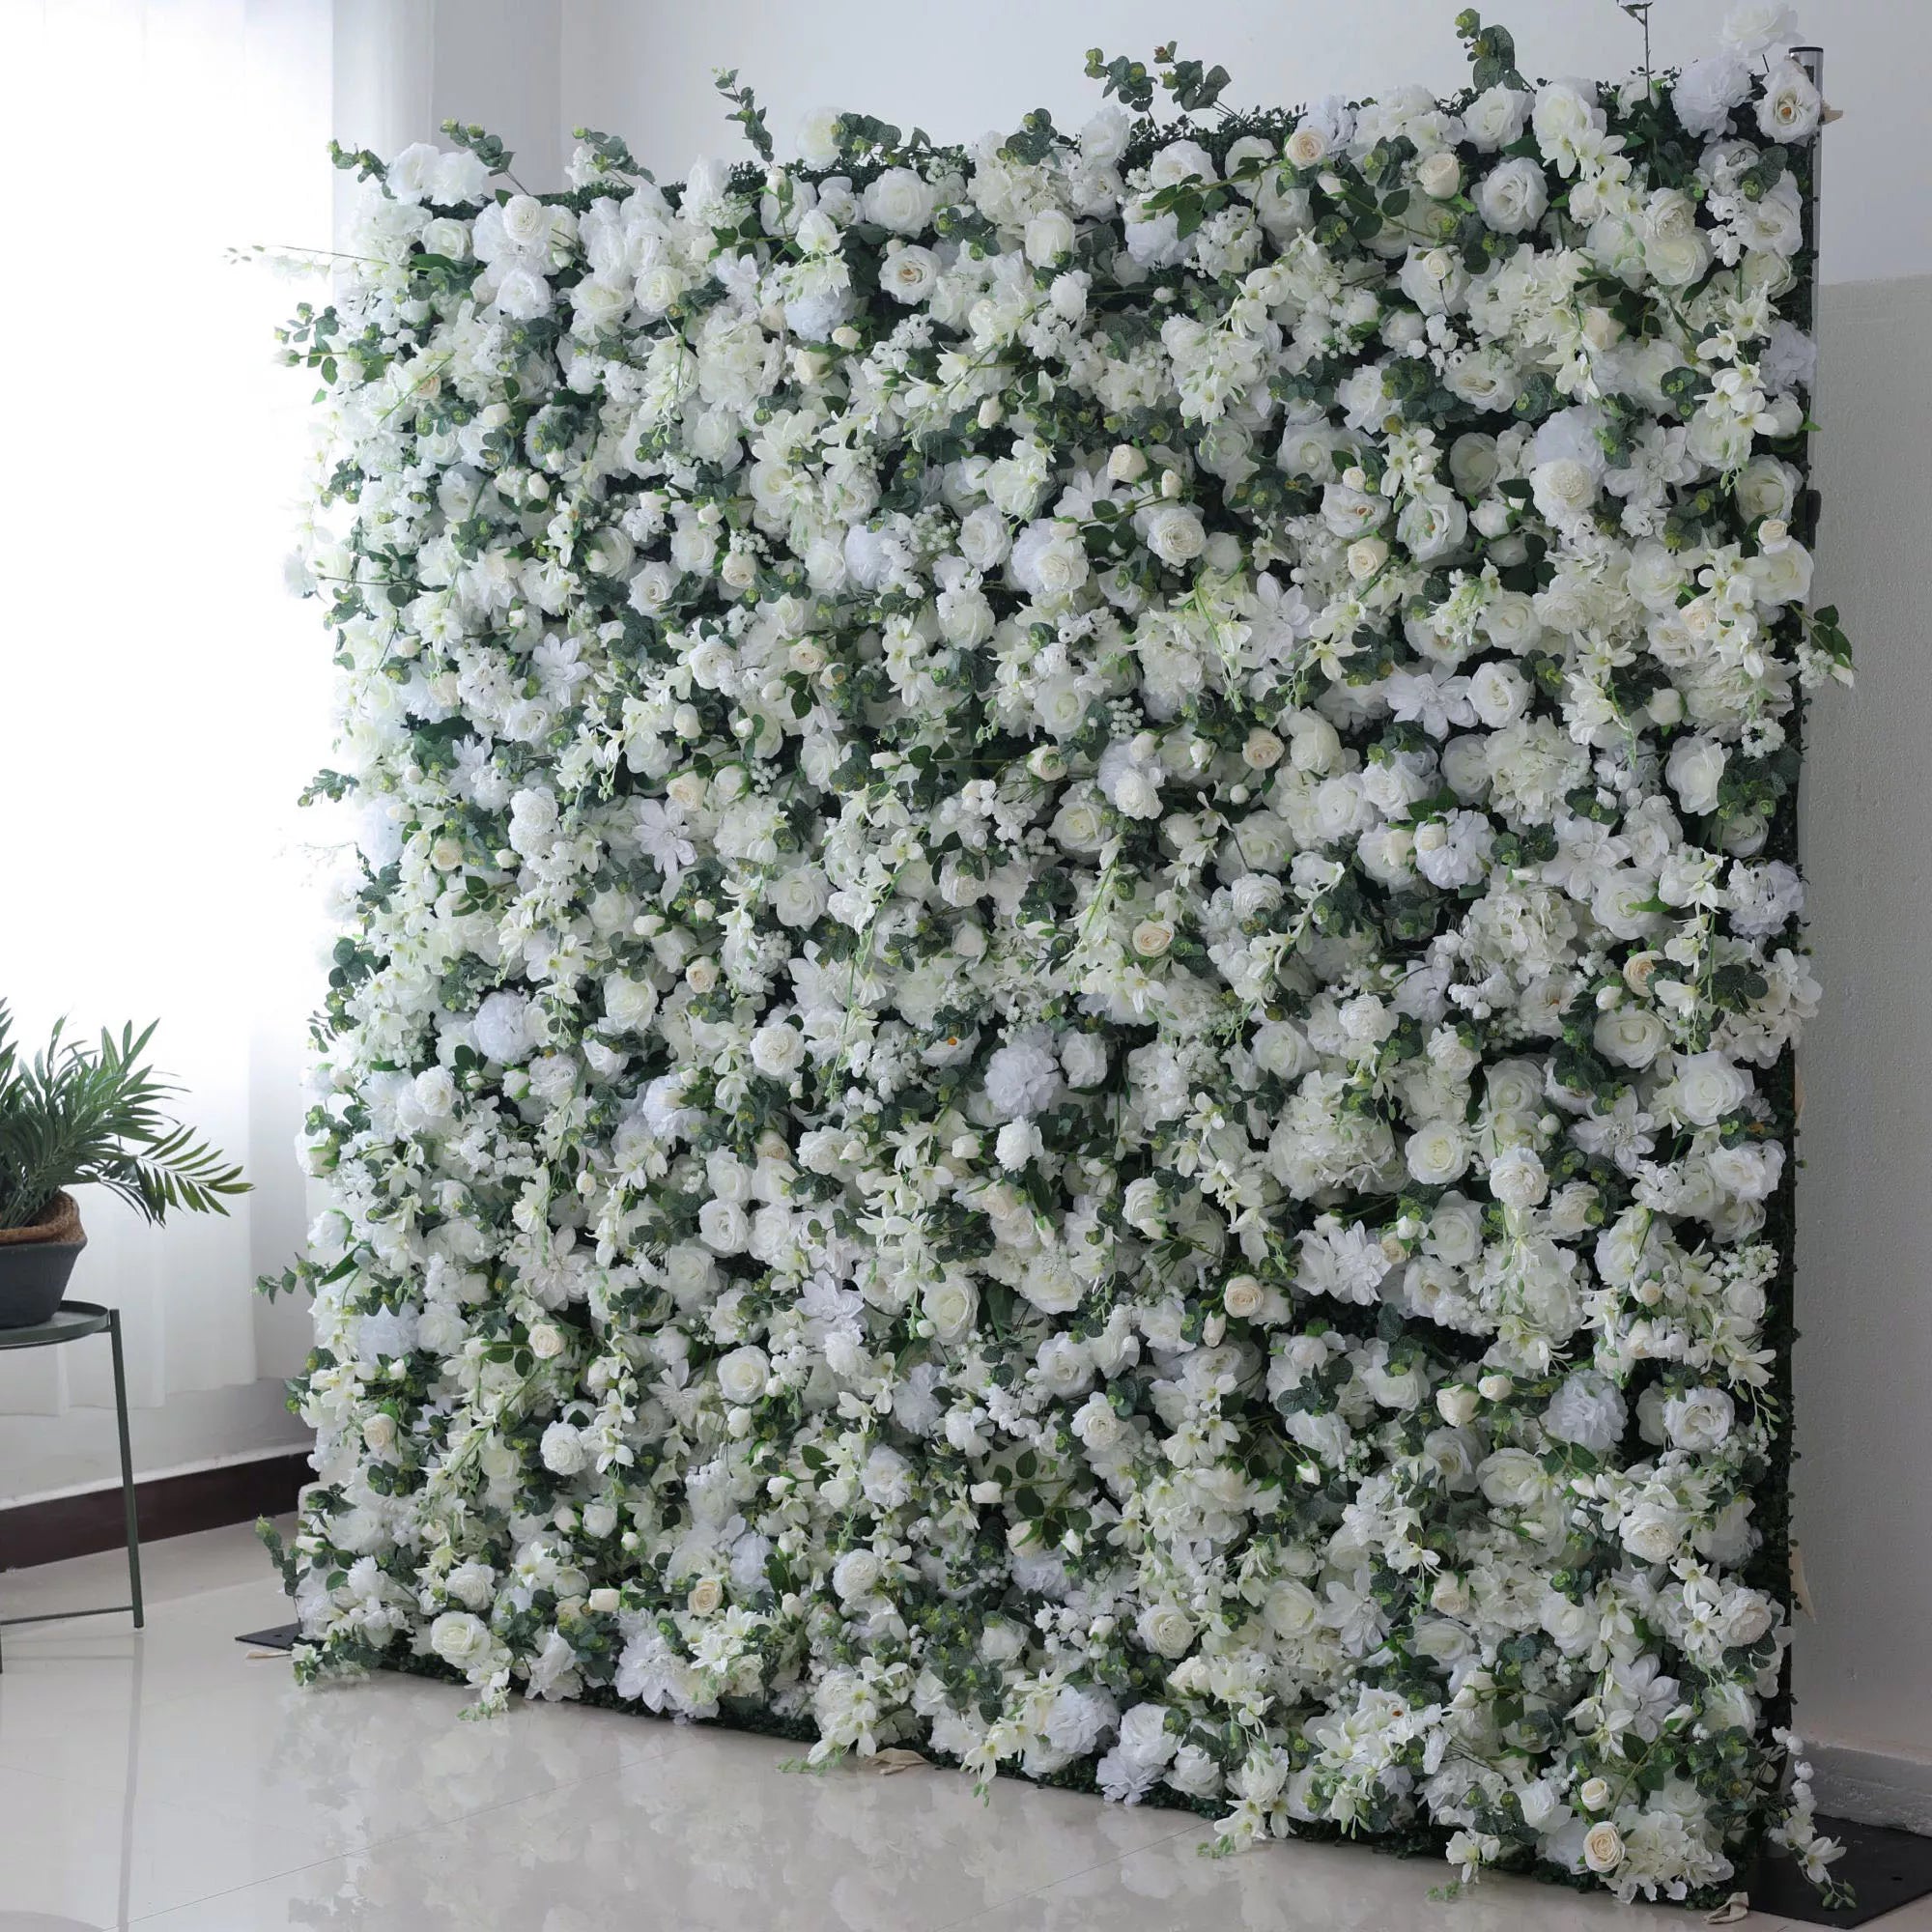 Valar Flowers Ethereal White Floral Wall with Soft Green Accents: Perfect for Elegant Events & Celebrations-VF-201